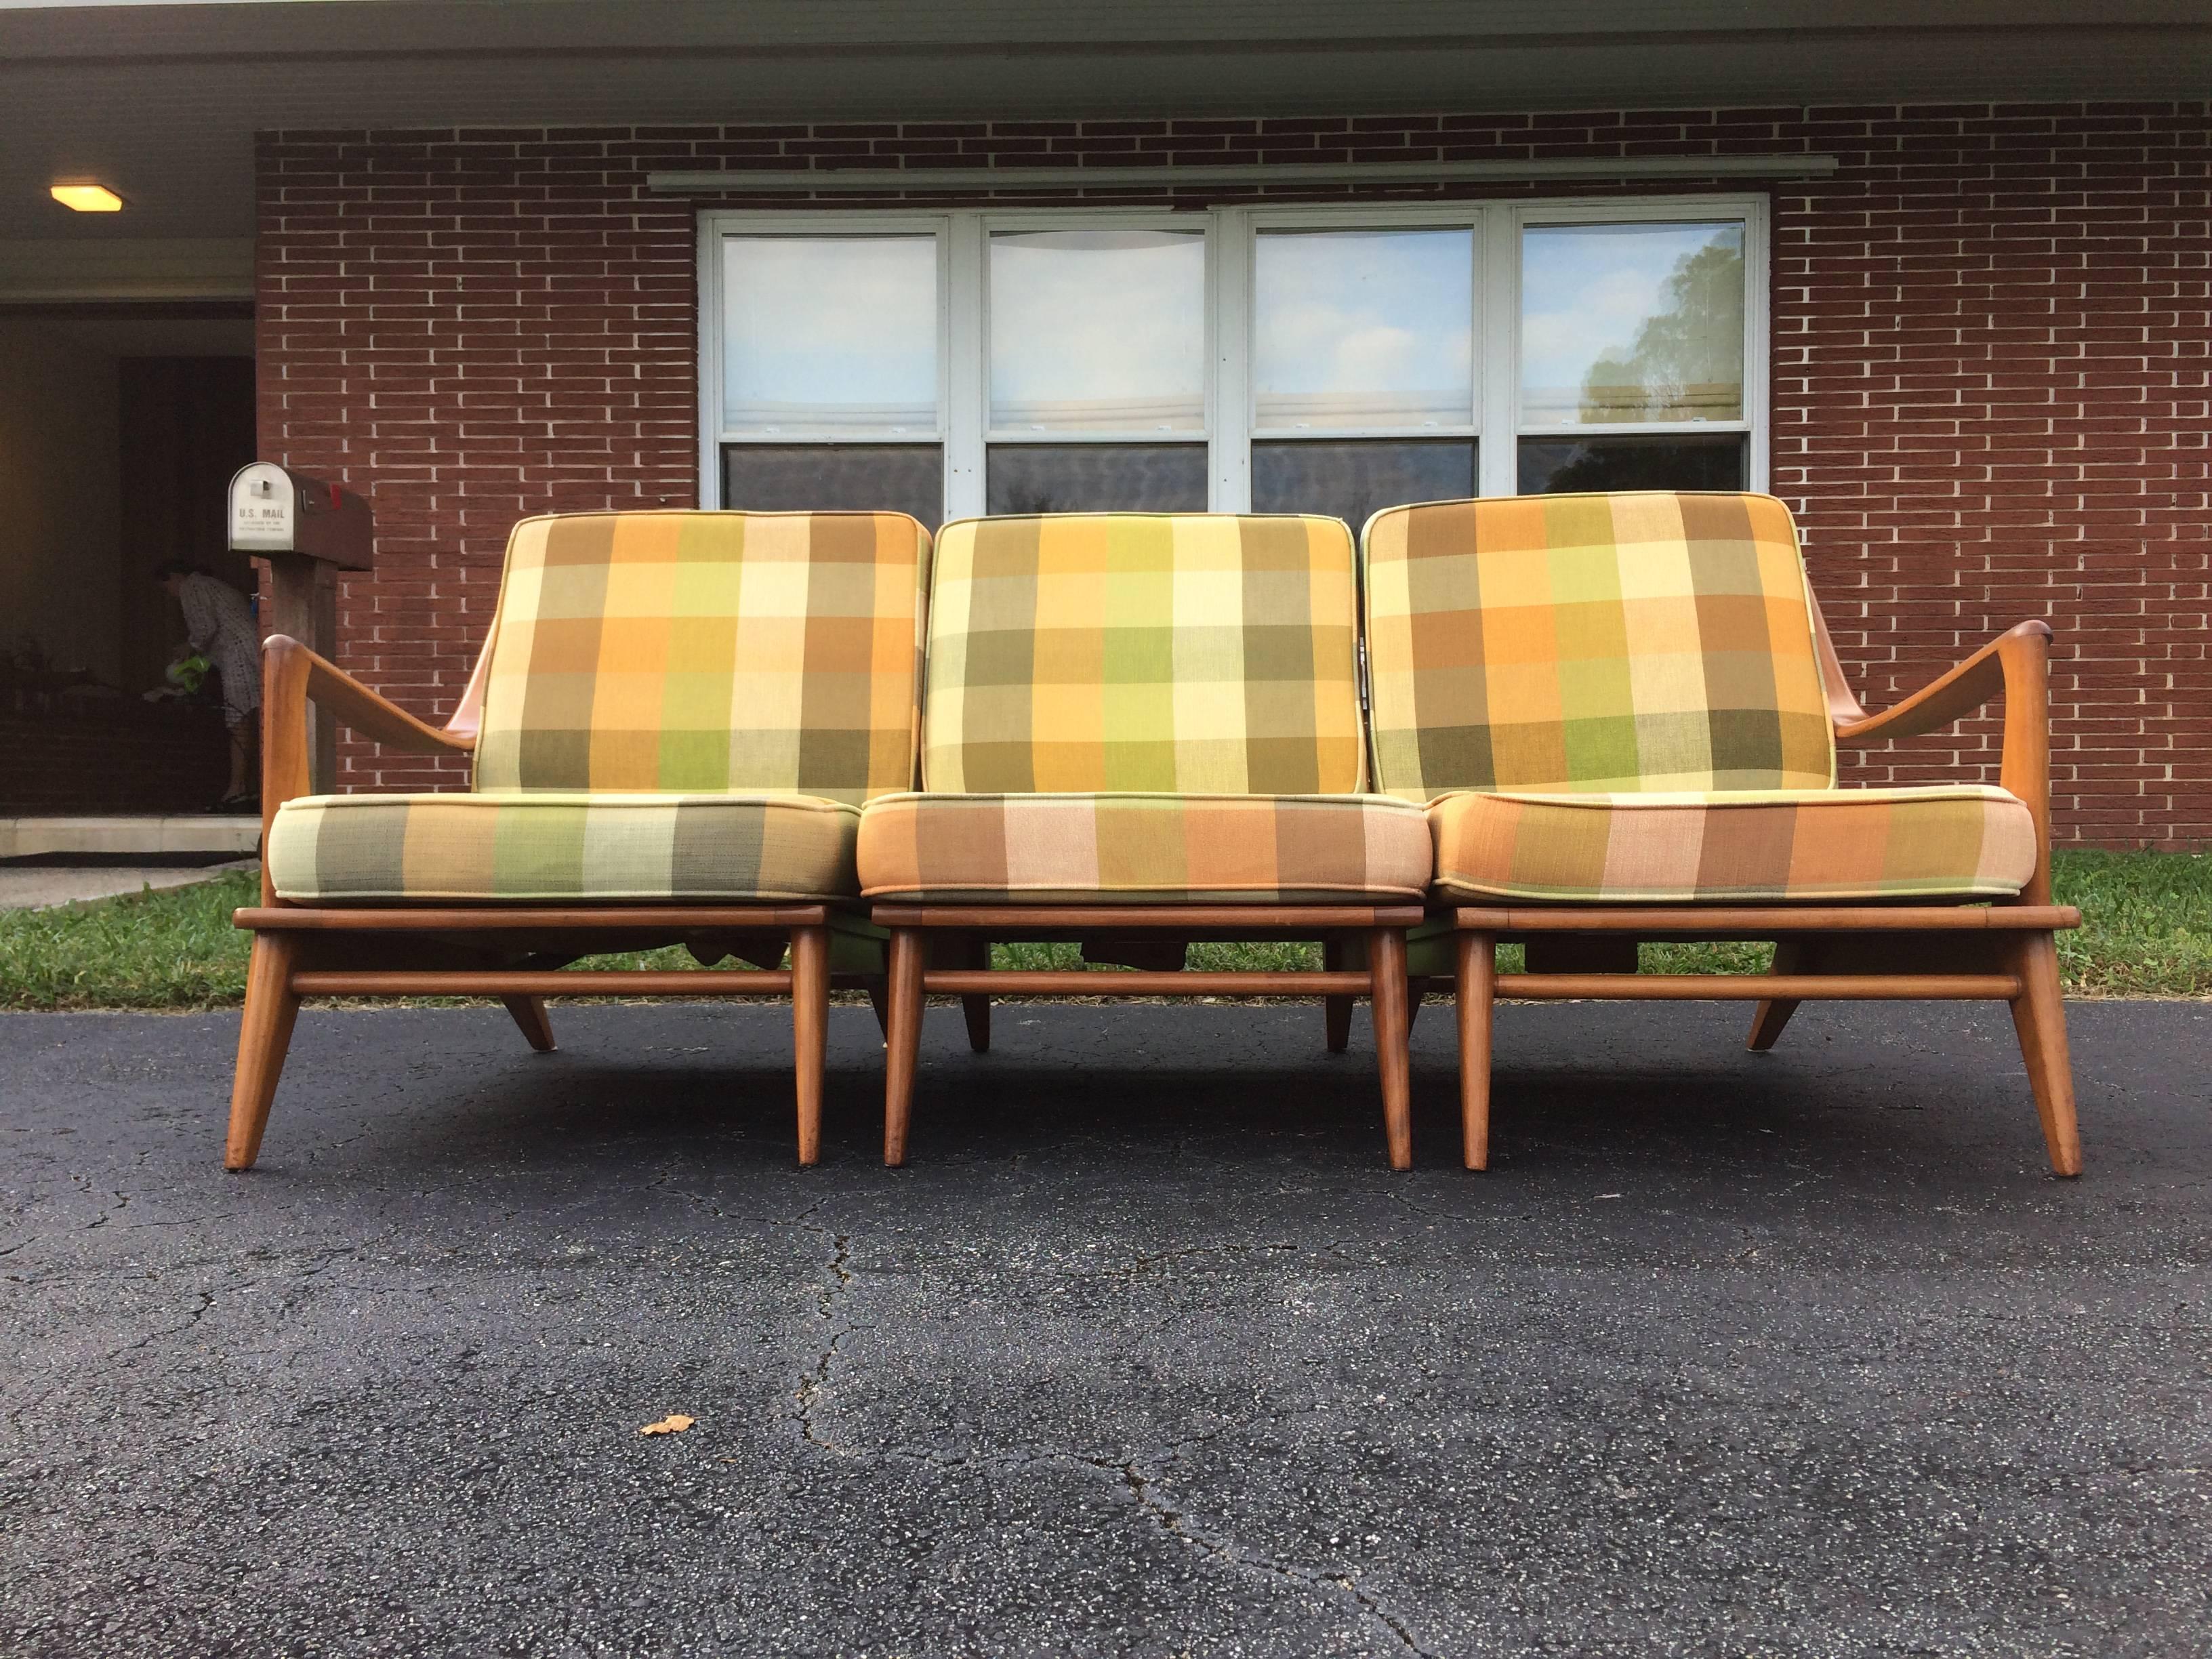 Signed Heywood-Wakefield sofa composed of three pieces.